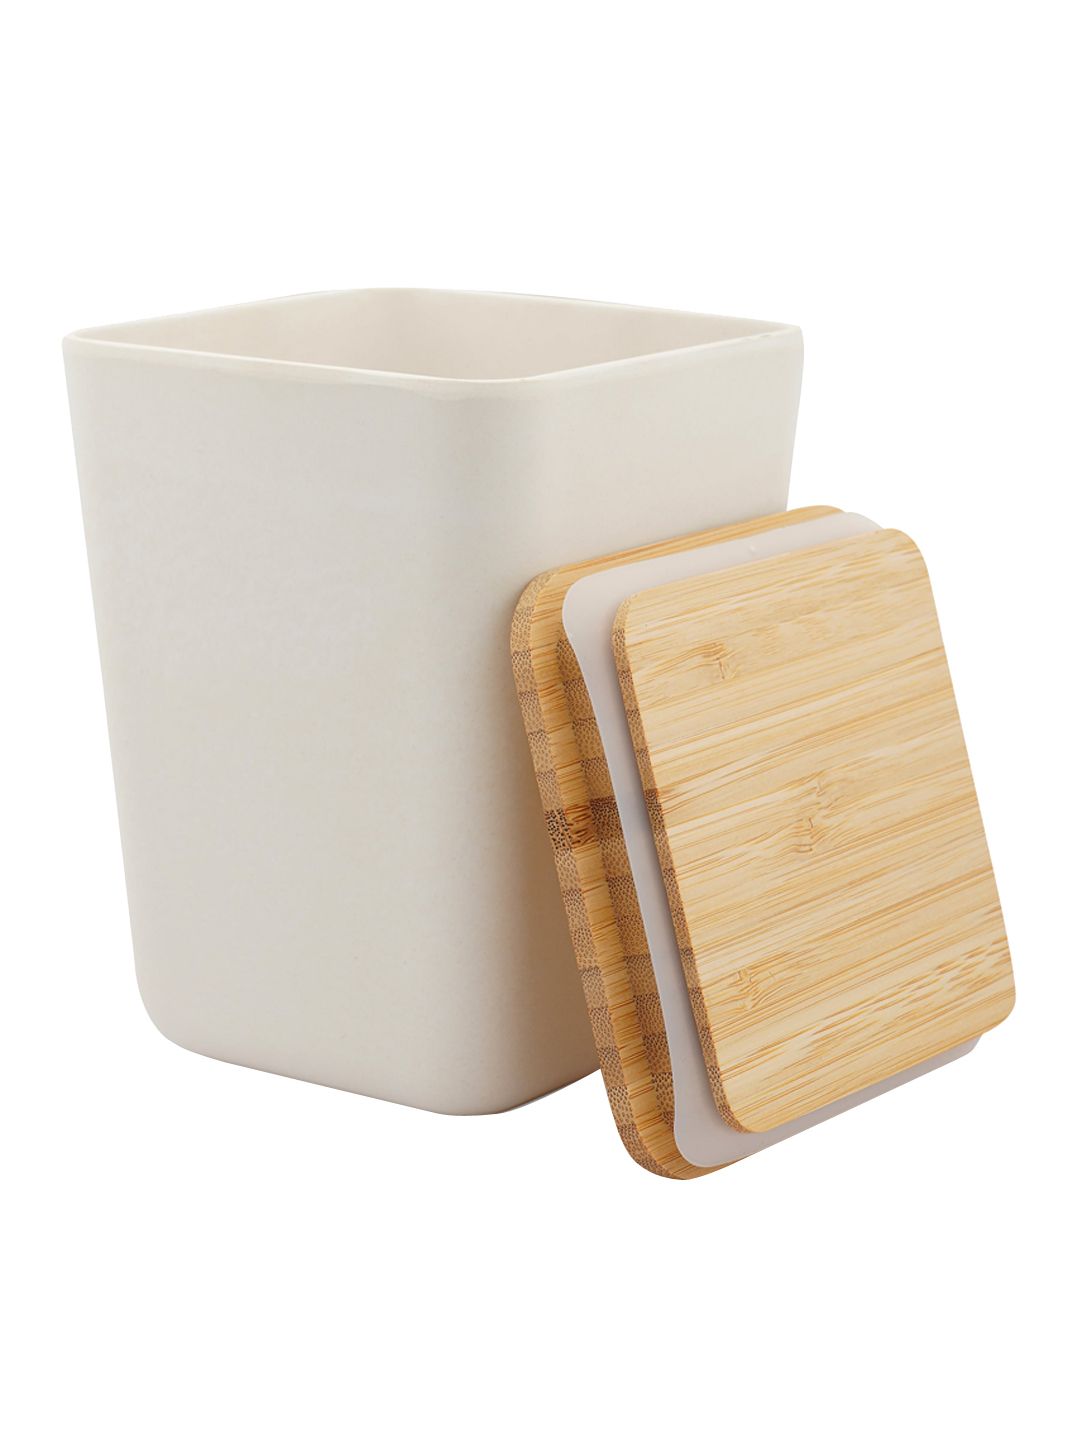 earthism Beige Colored Solid Bamboo Storage Air Tight Container Price in India